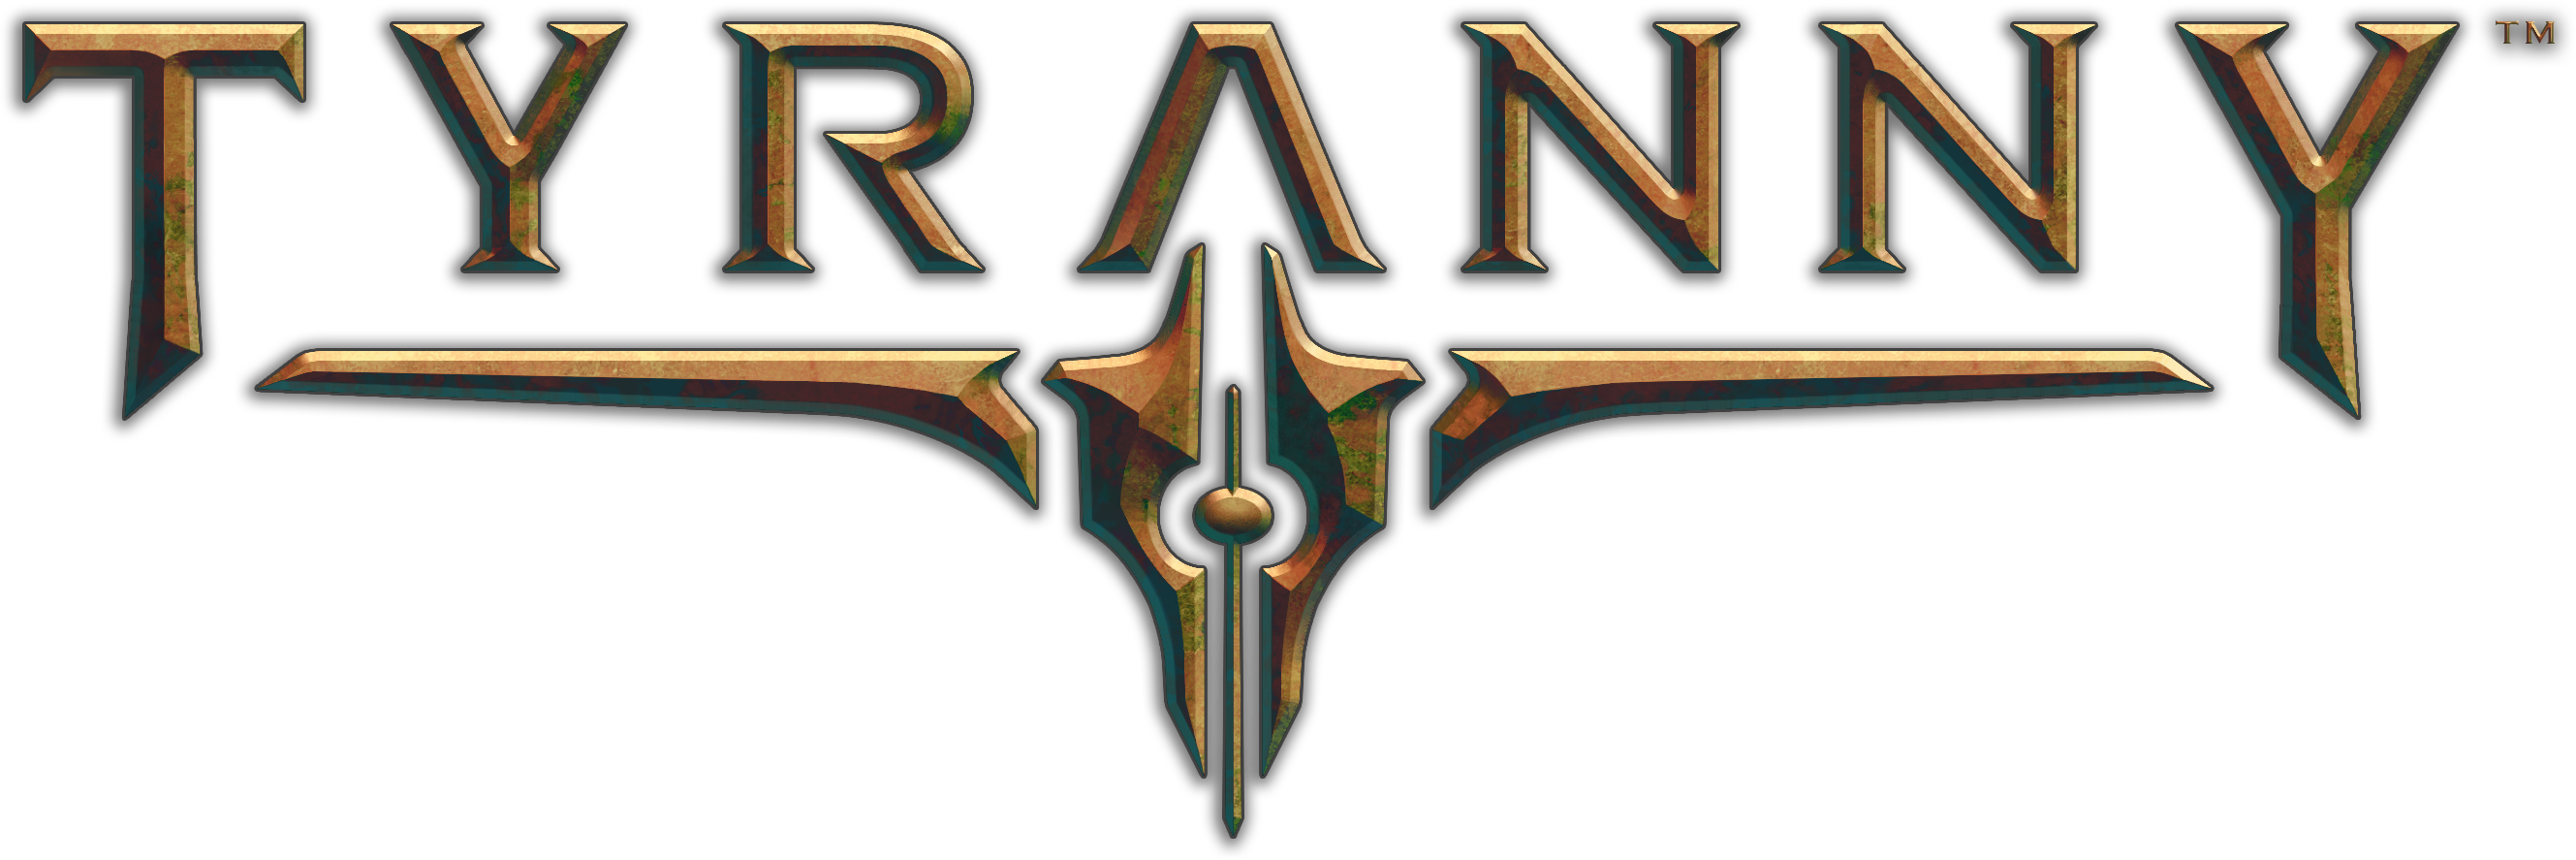 download tyranny for free